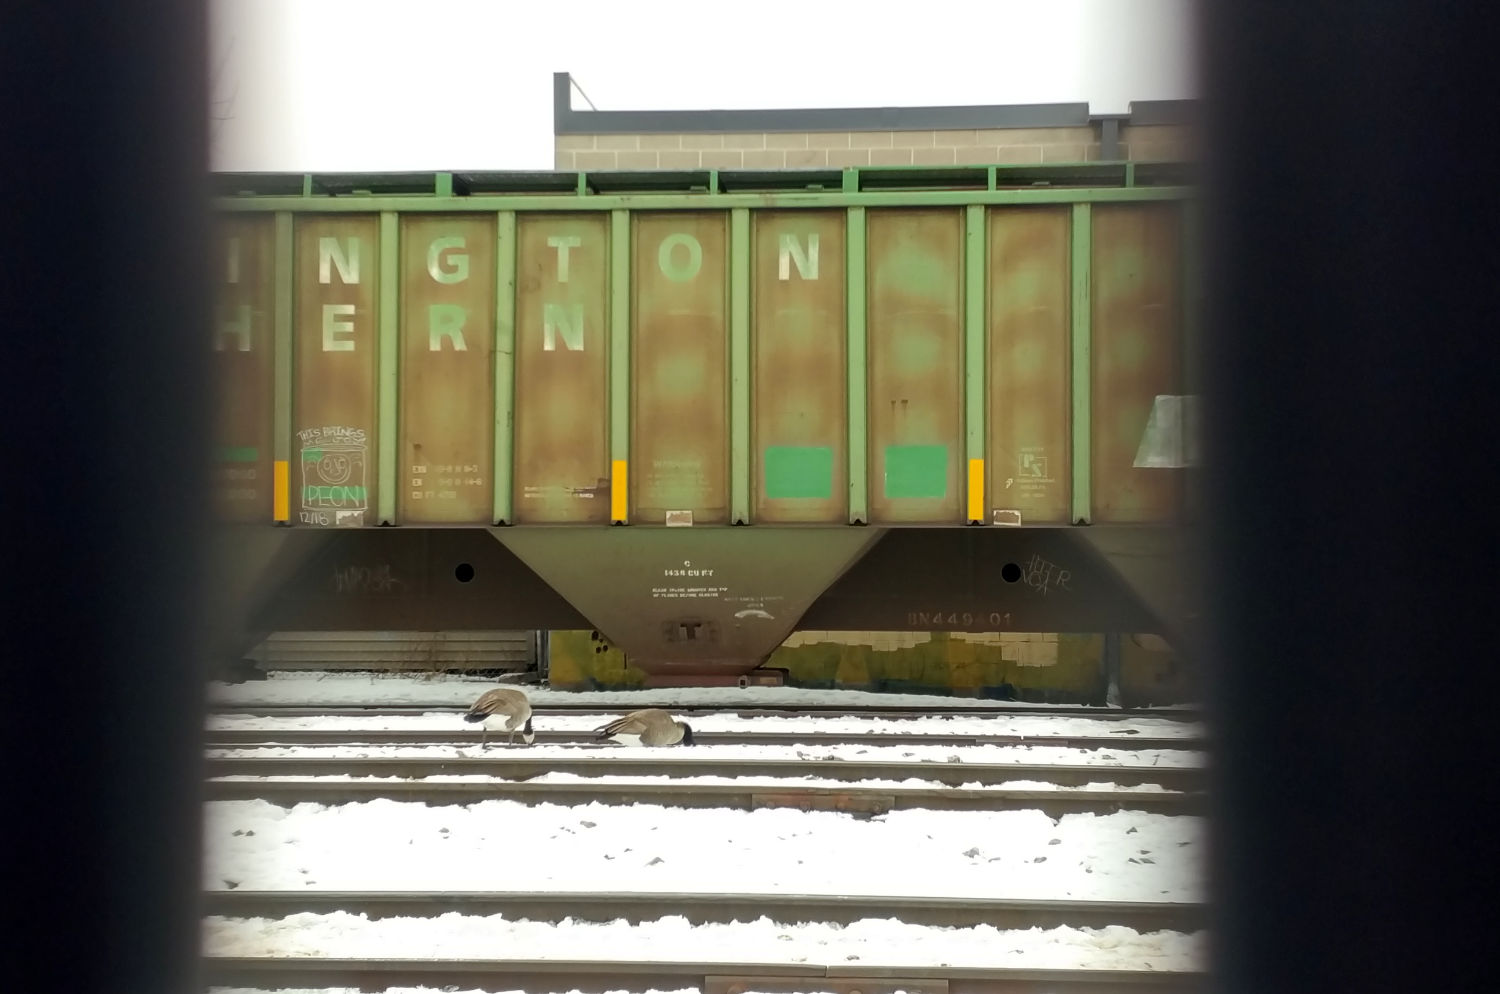 geese along snowy rail tracks with boxcar in background